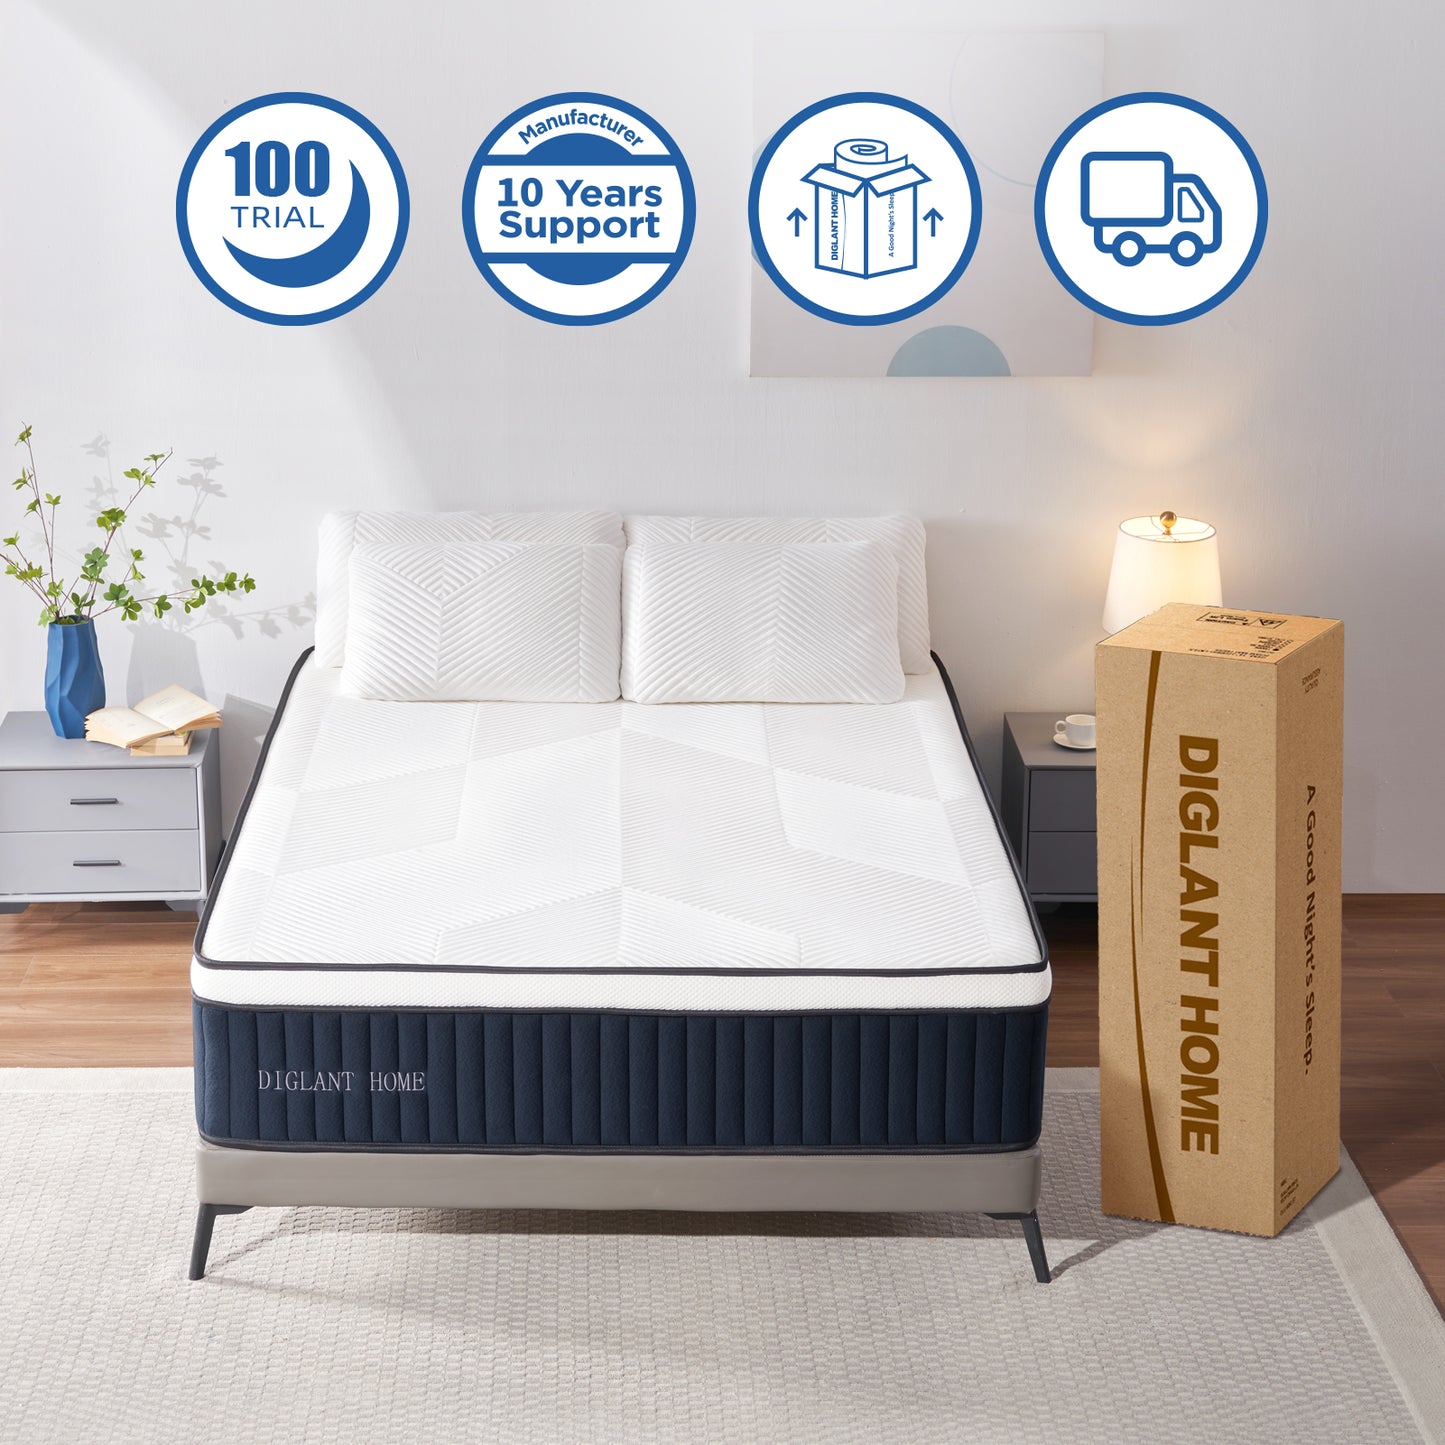 DIGLANT 14 Inch Euro Top Hybrid Memory Foam Mattress with Pocket Springs, Medium Plush Feel Mattress in a Box, Supportive & Pressure Relief, CertiPUR-US Certified